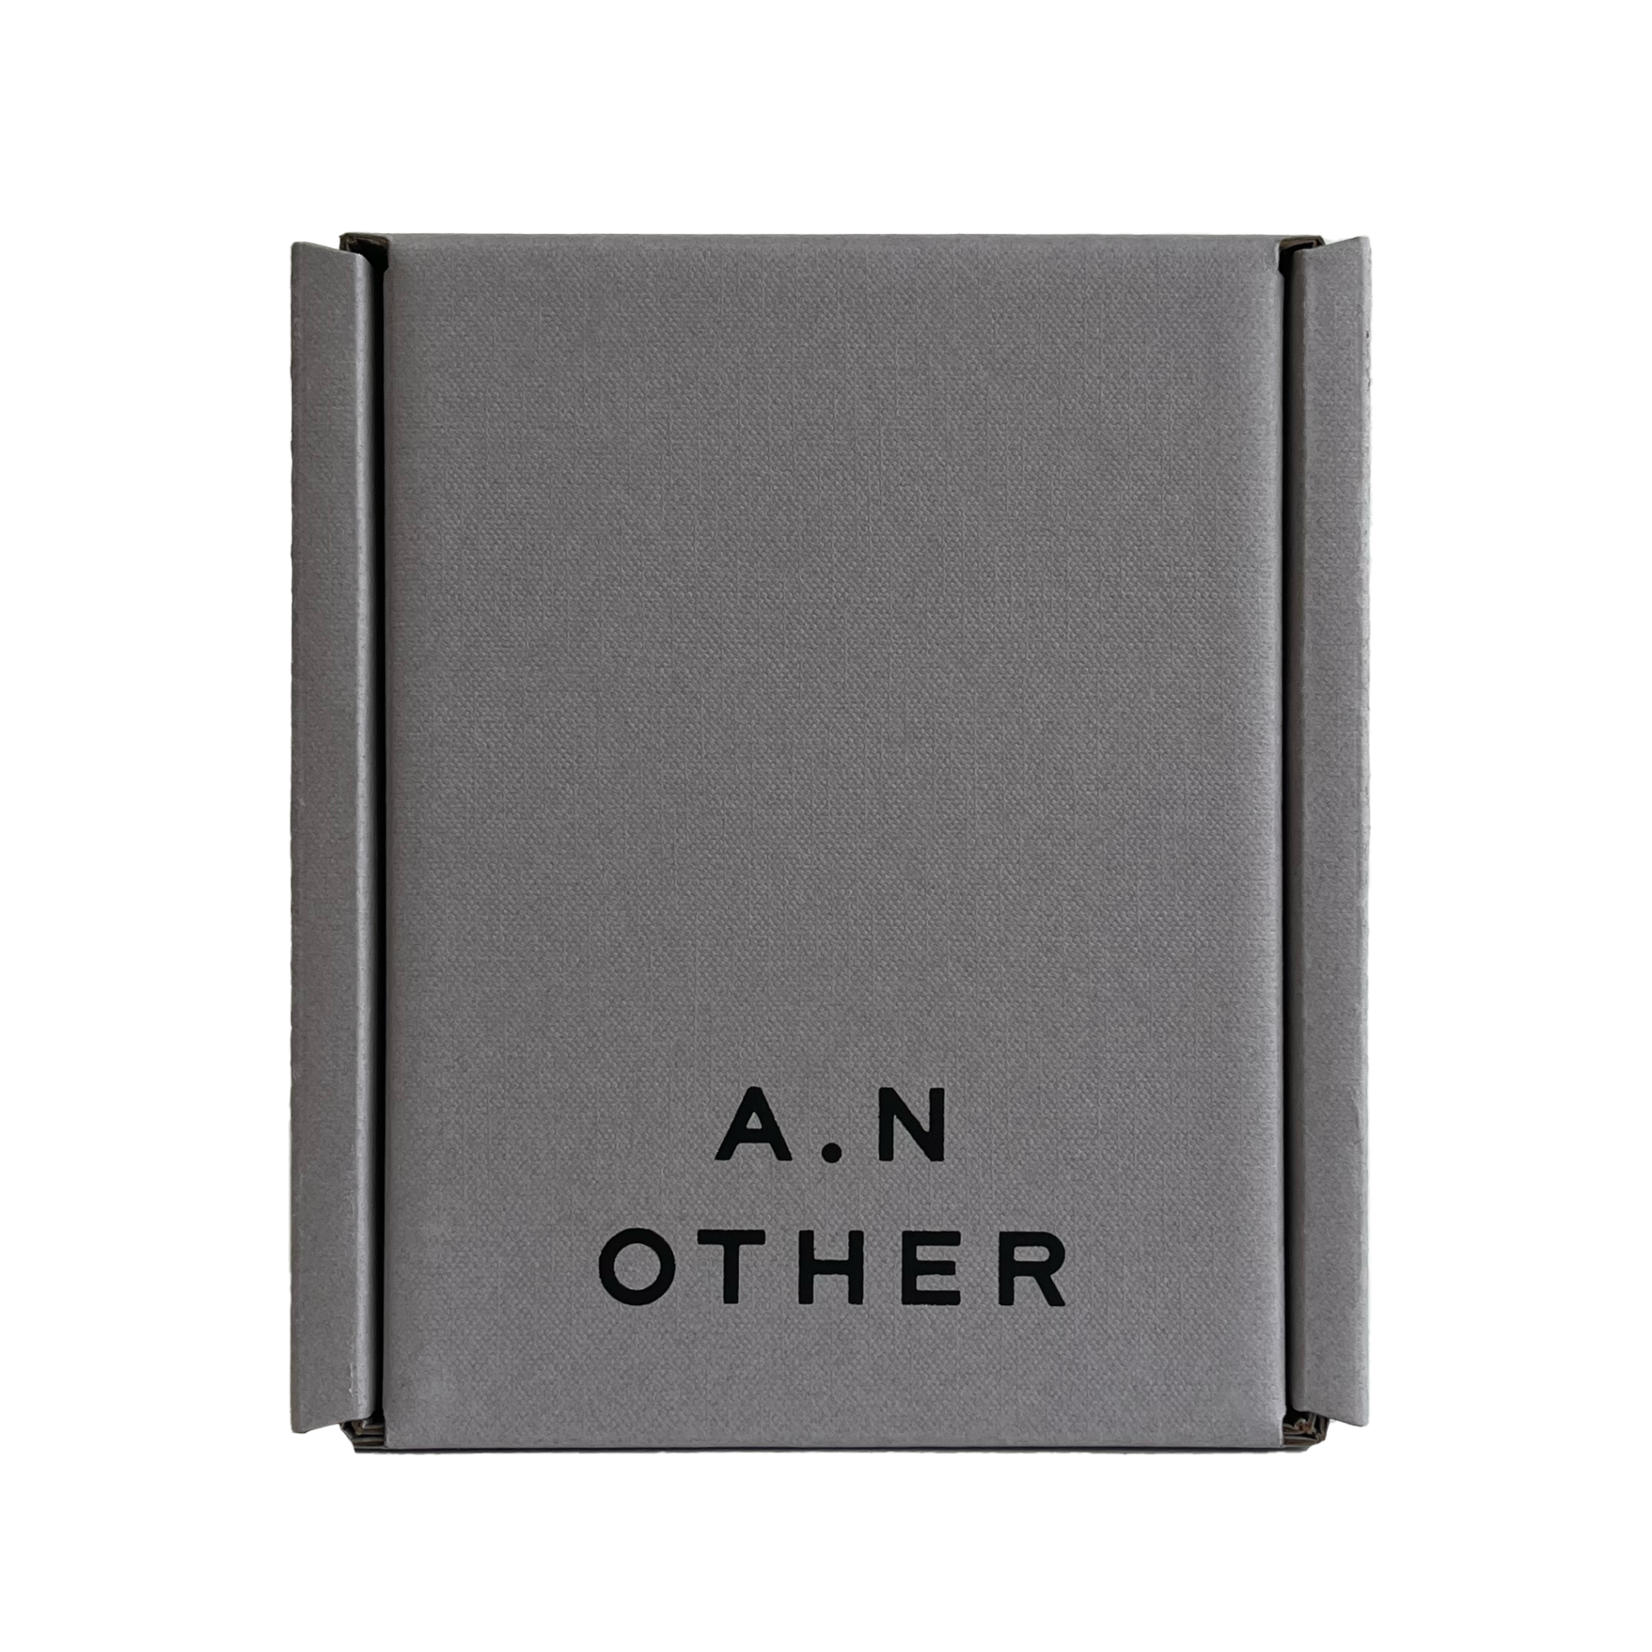 A.N. OTHER A.N. OTHER WF/2020 50 ml